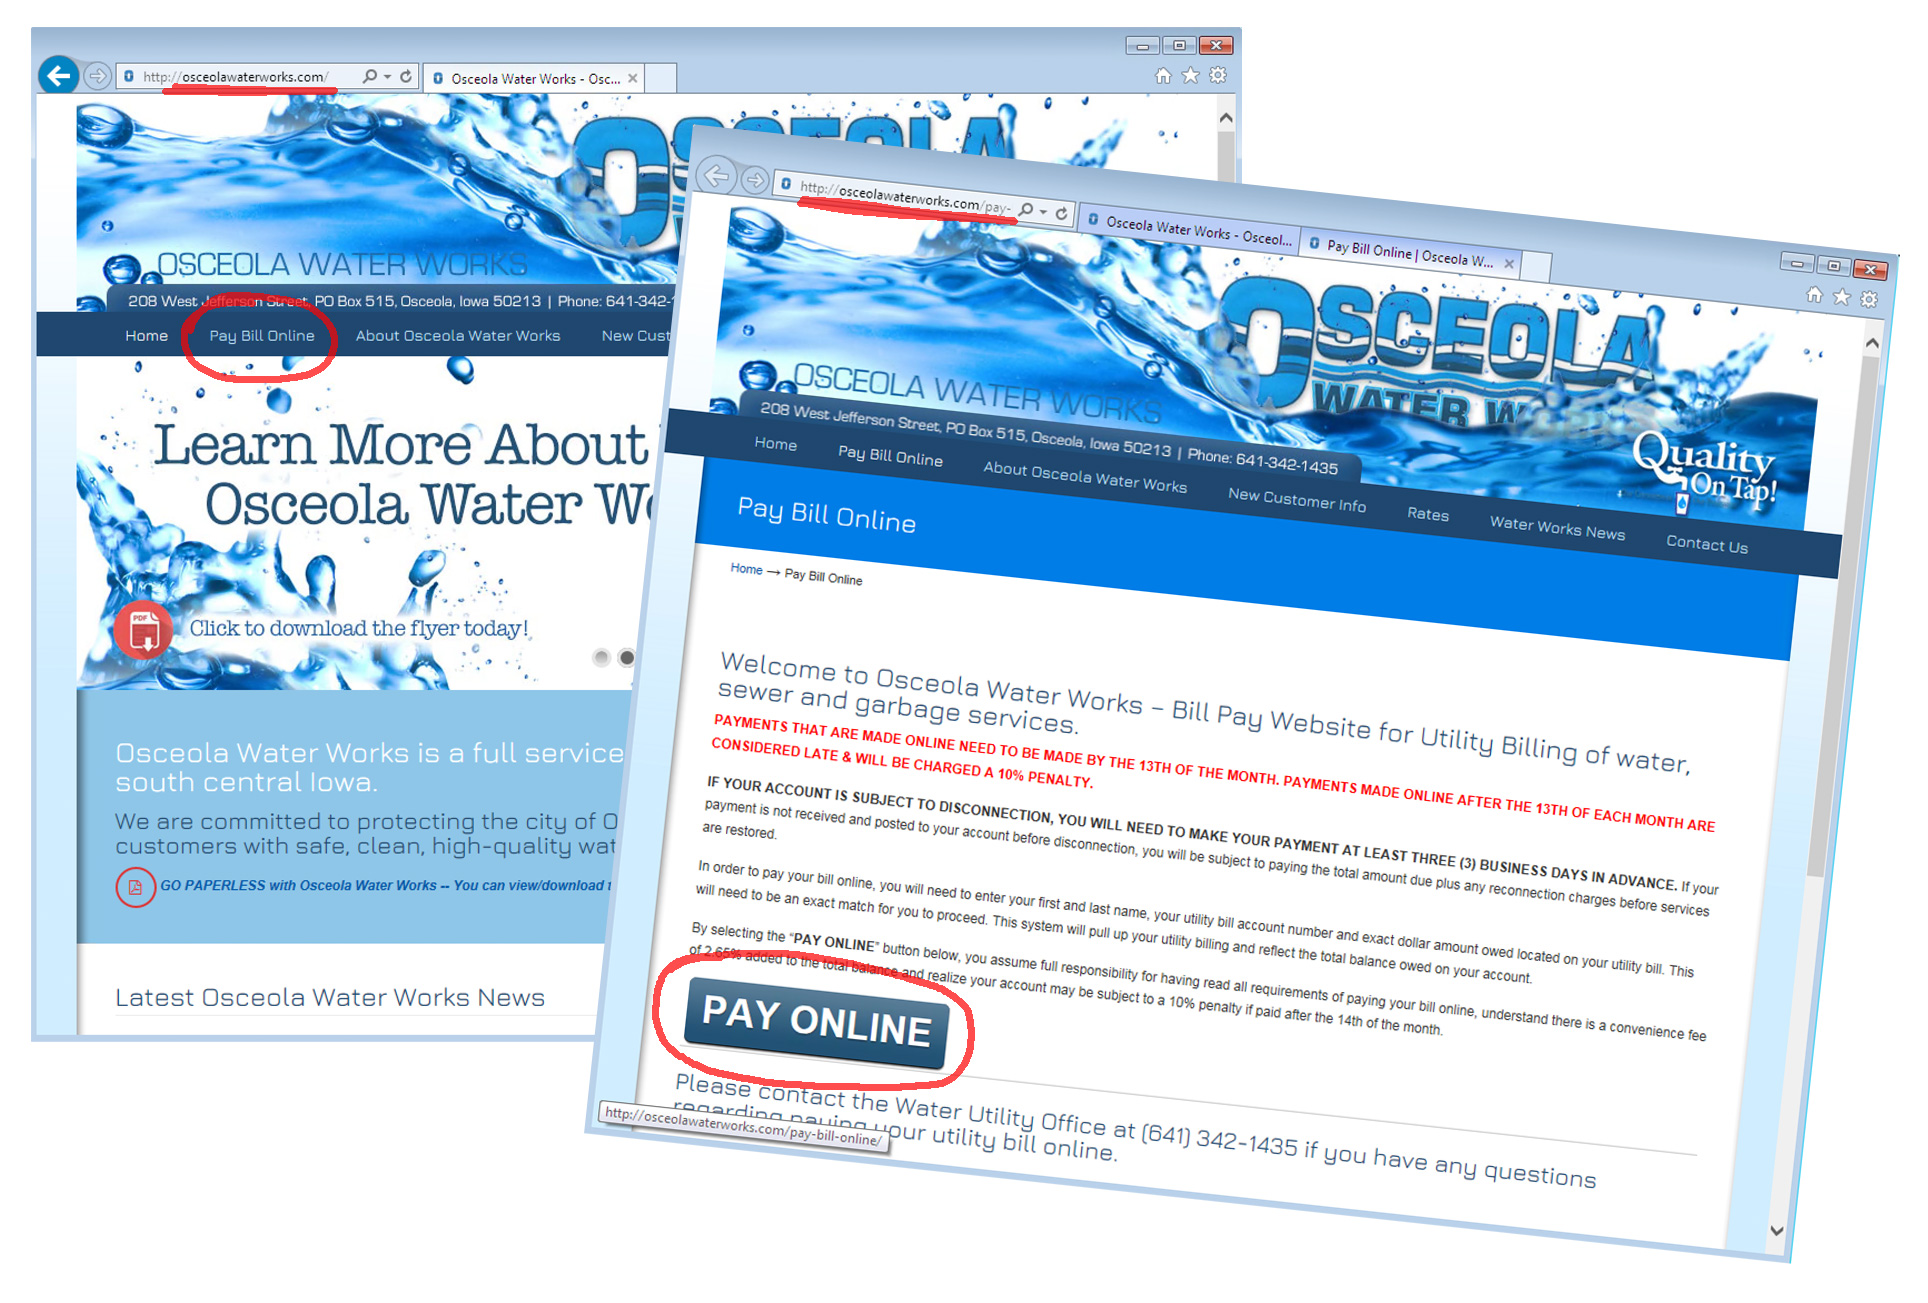 osceola water works online payment